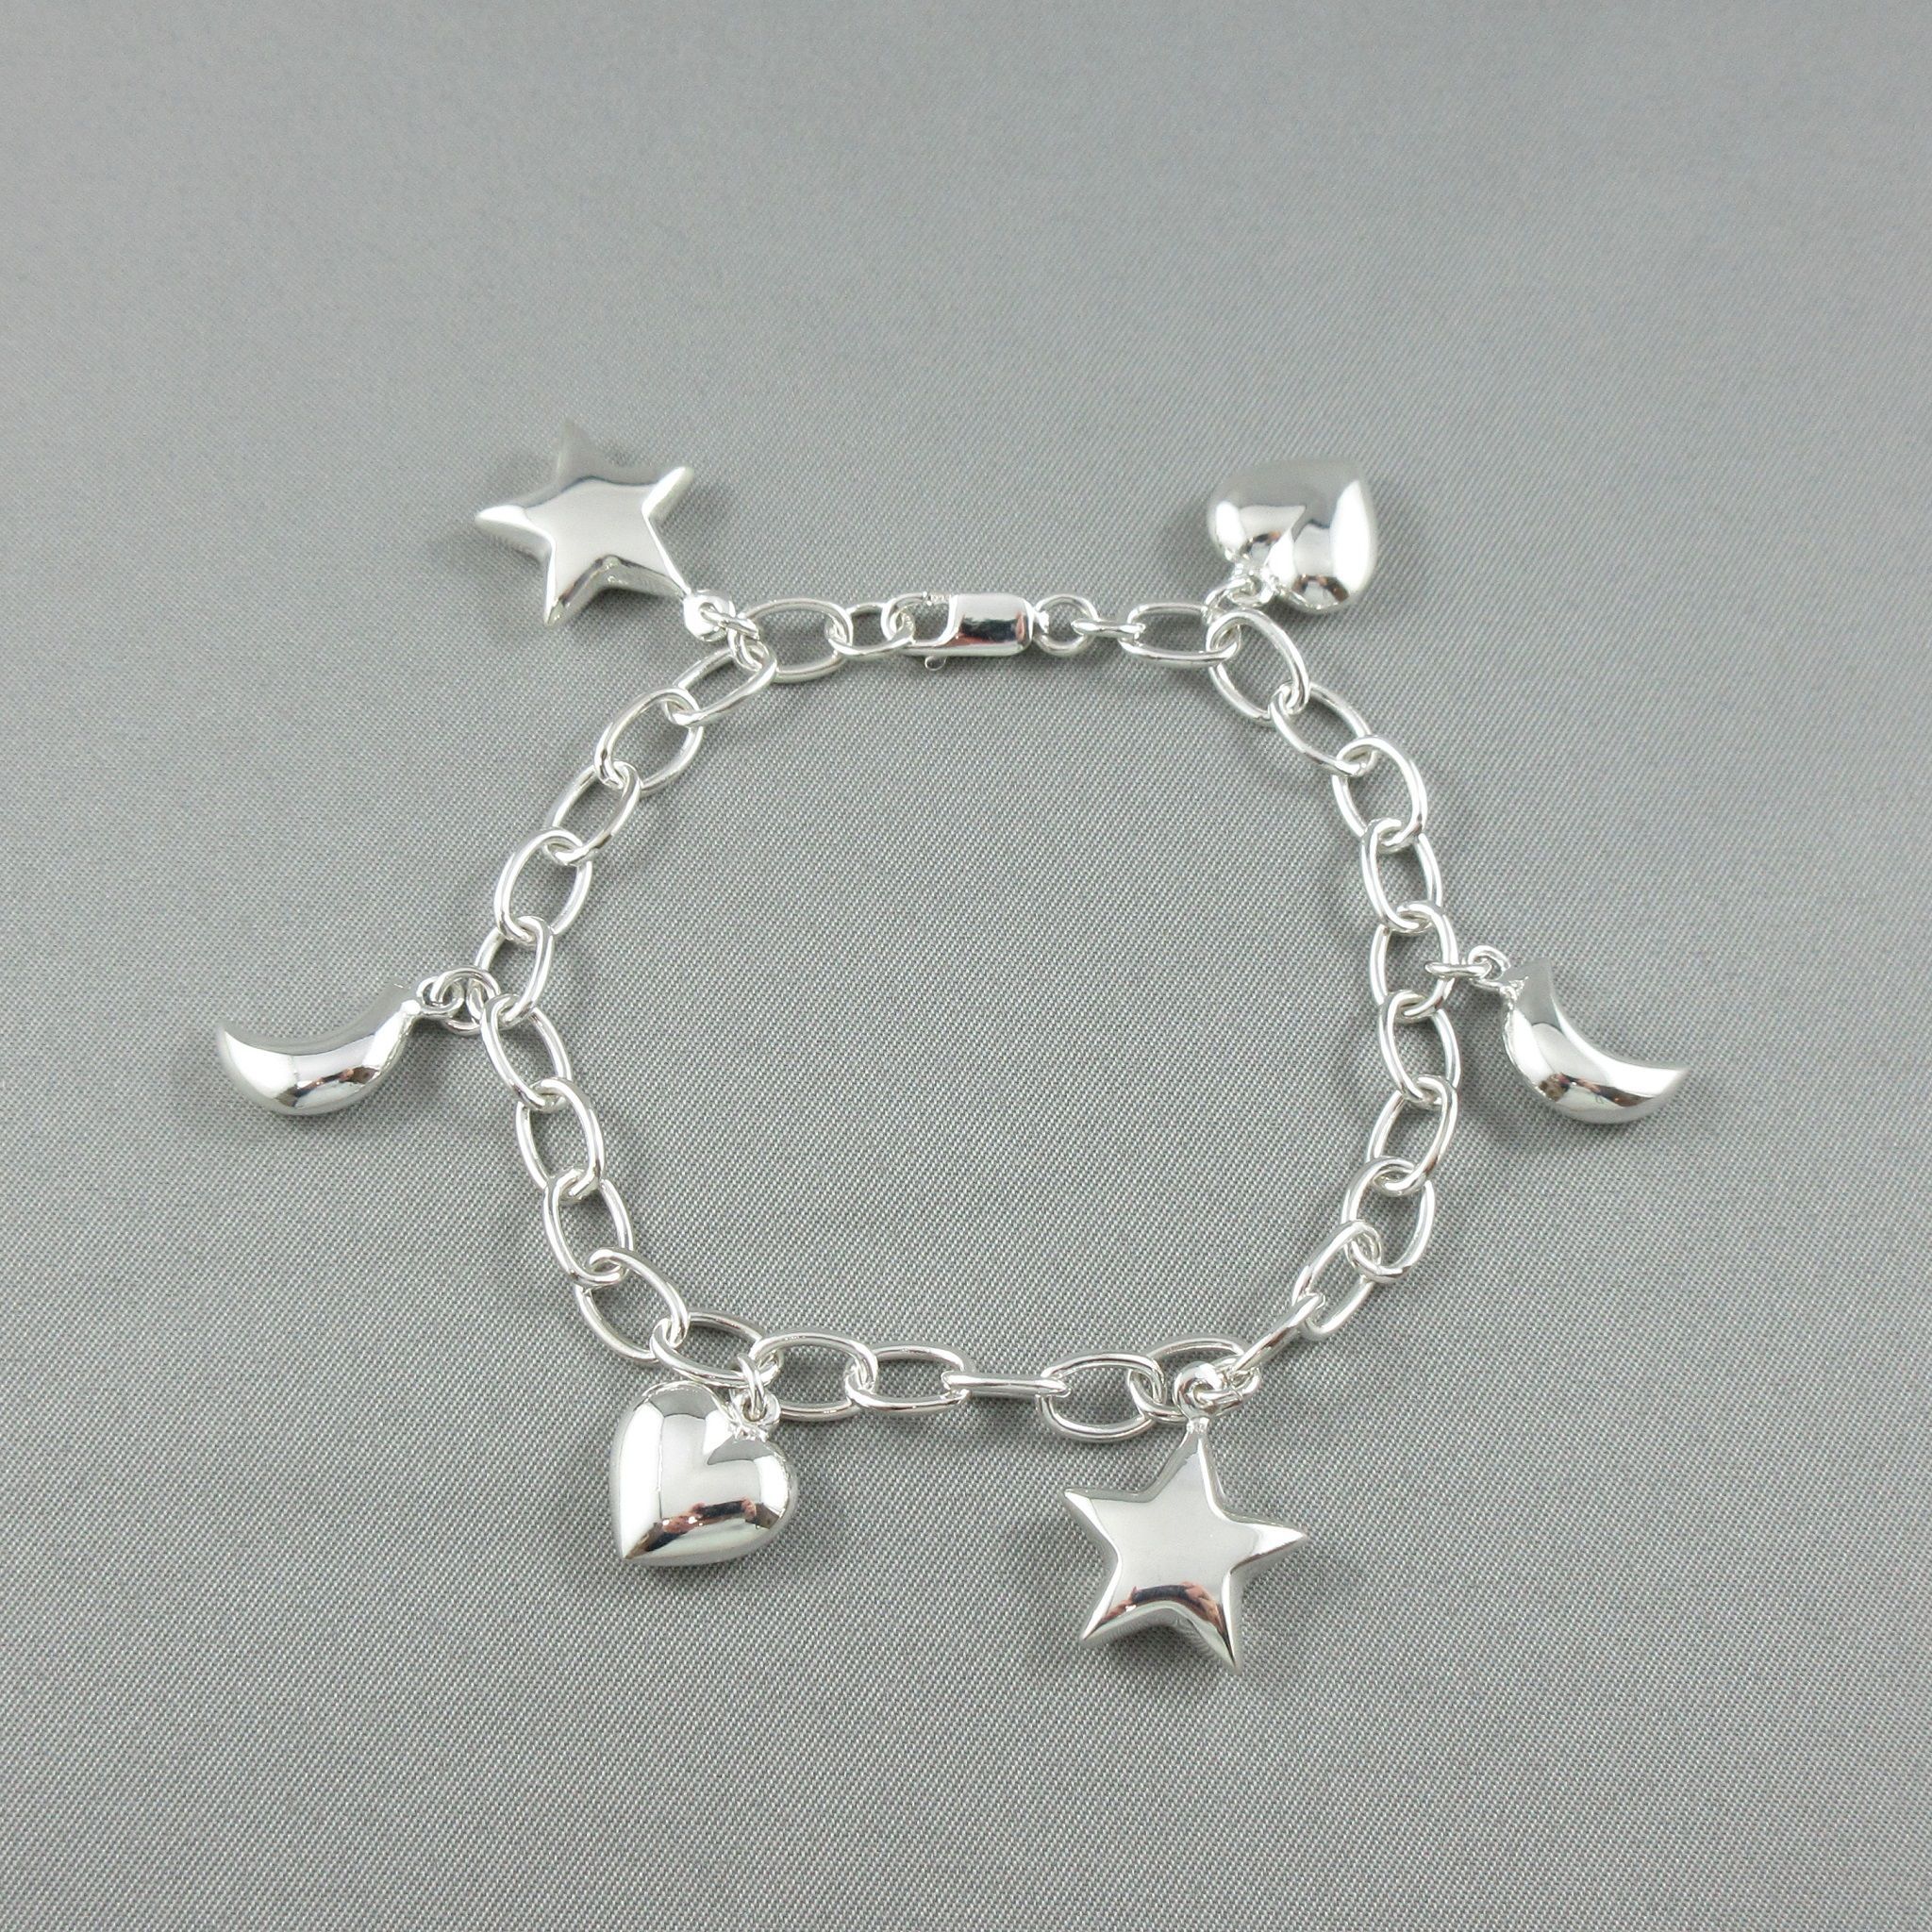 Silver bracelet and charms